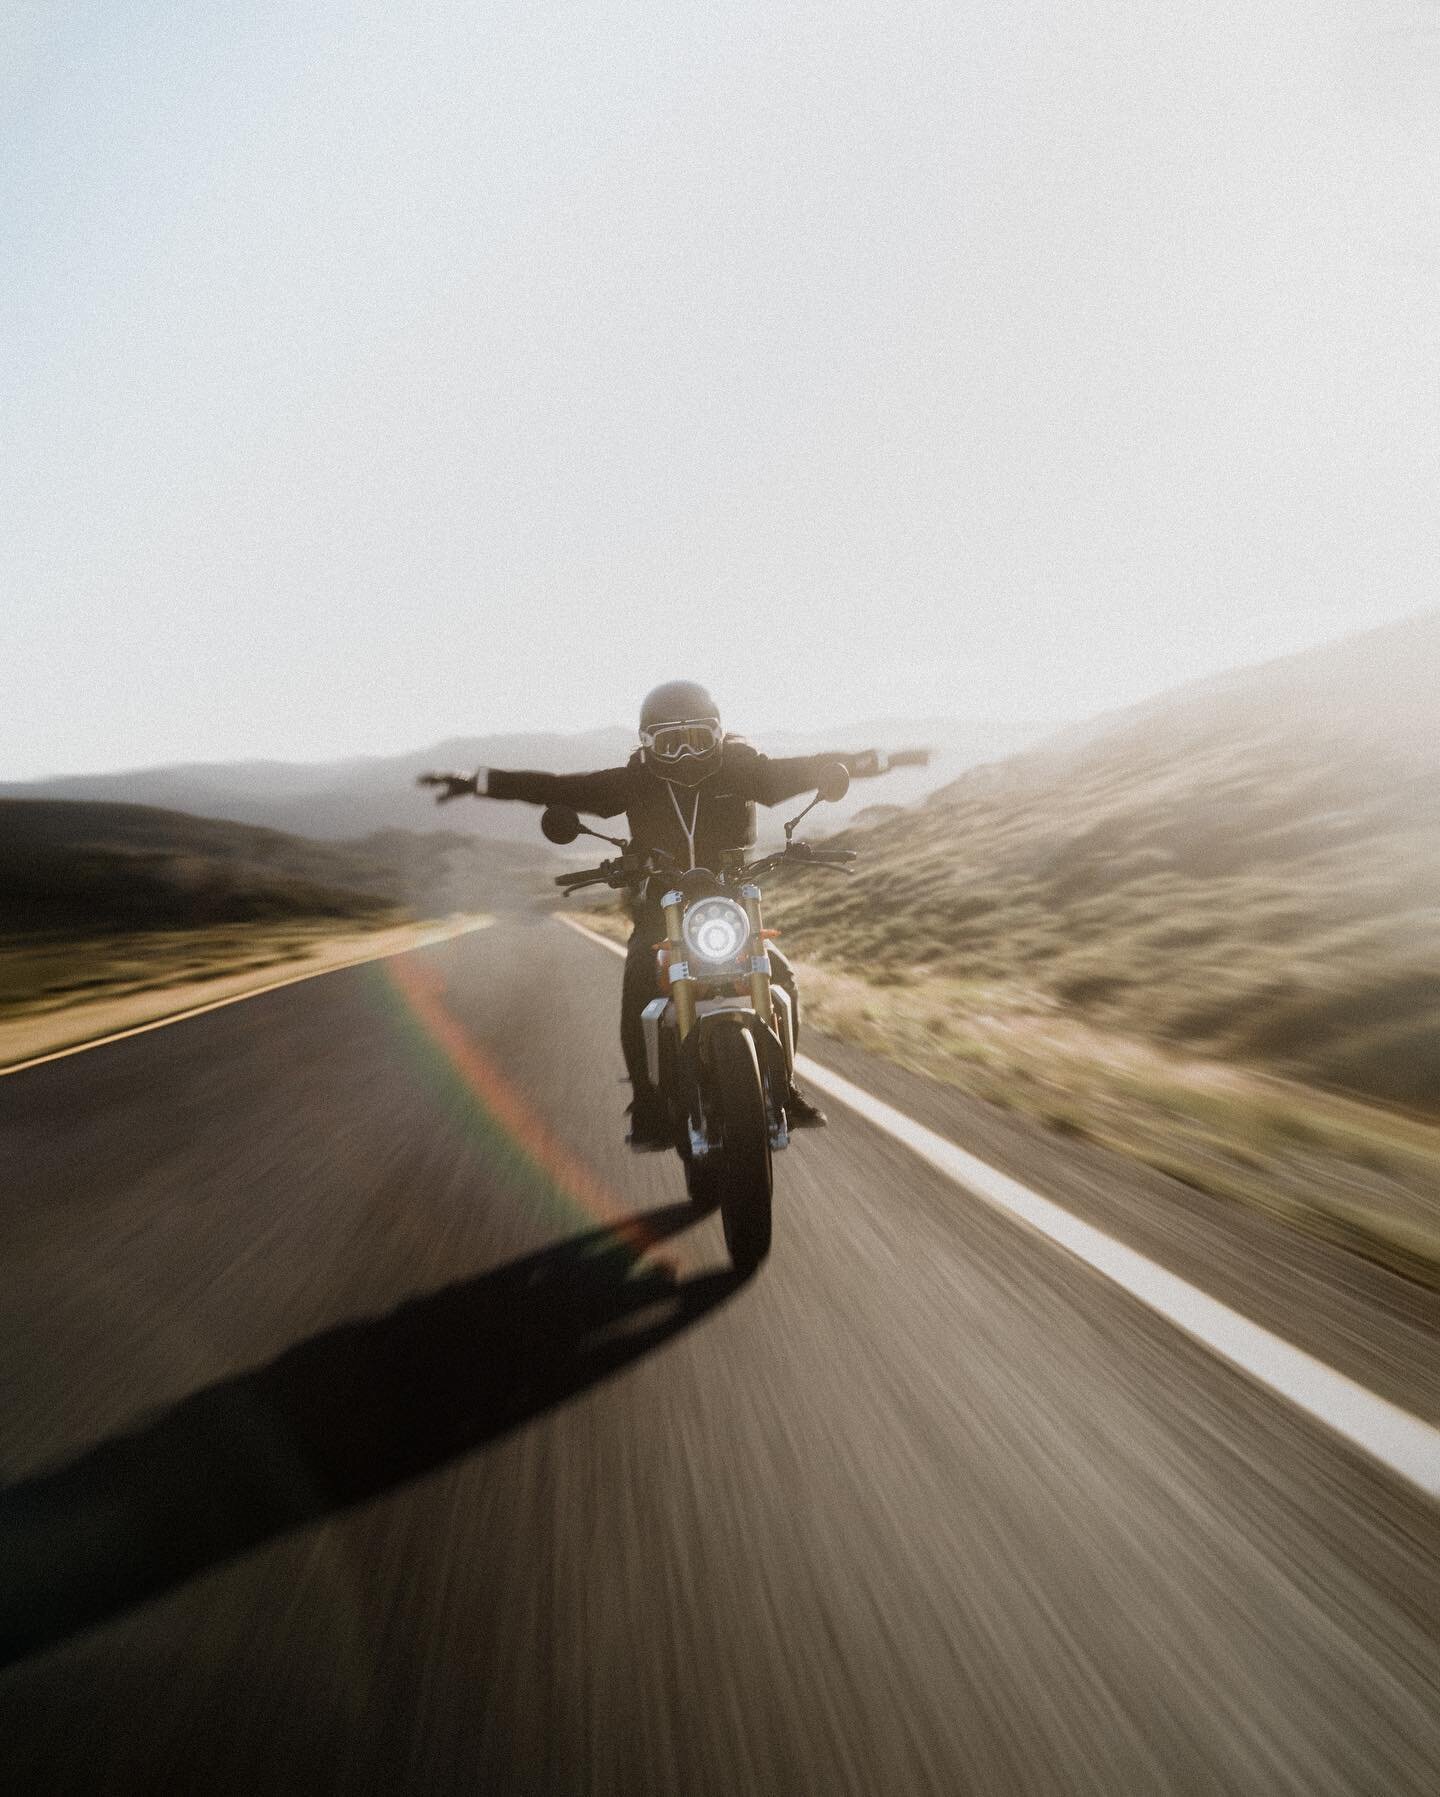 It&rsquo;s epic moments like these we never forget. Get out and ride to make it get through the #sydneylockdown 🤙🏽

Ready to Roll...
#caballero #caballero500 #fantic500 #fanticcaballero #madeintreviso
#scrambler #rally #tracker #madeinitaly #premie